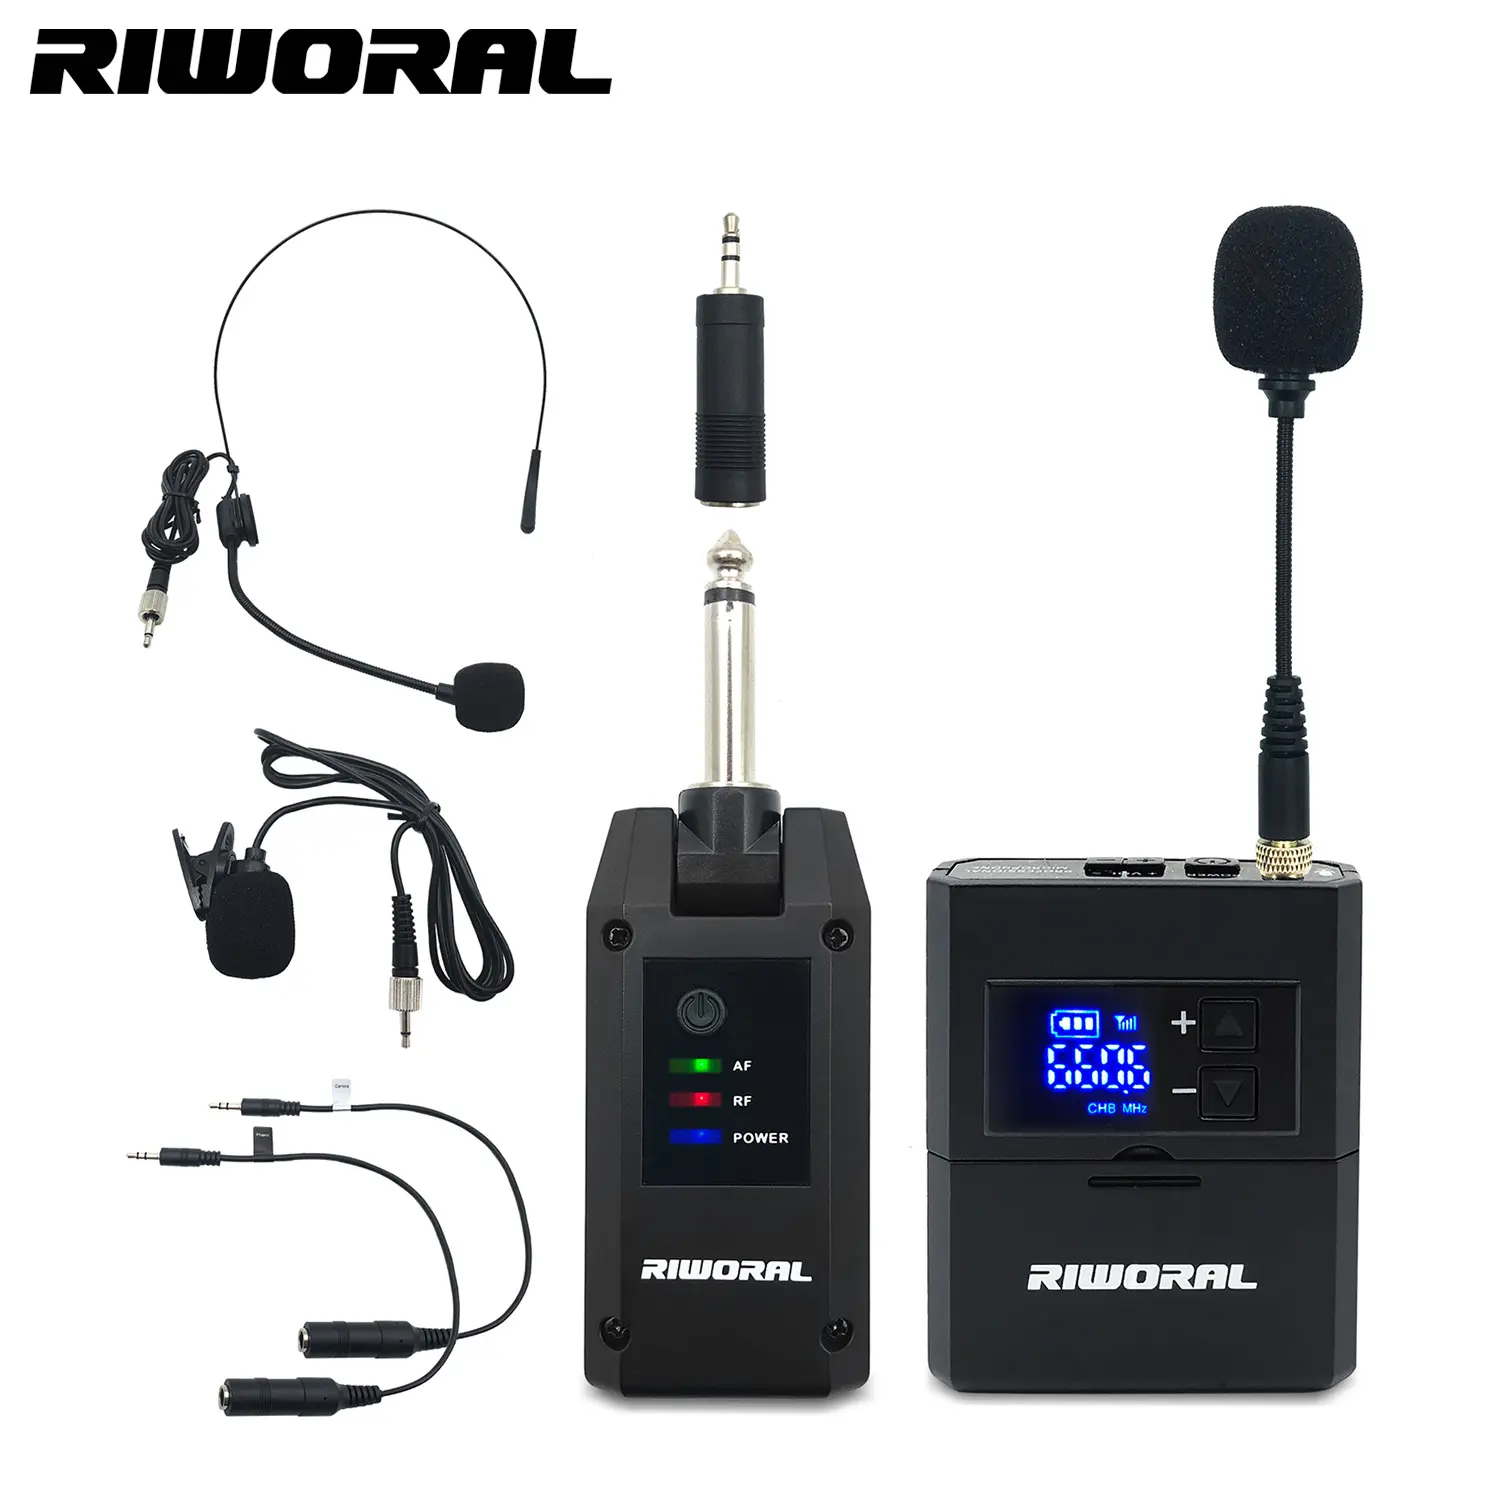 RW218 Professional uhf recording mic Wireless Lavalier microphone for phone&camera